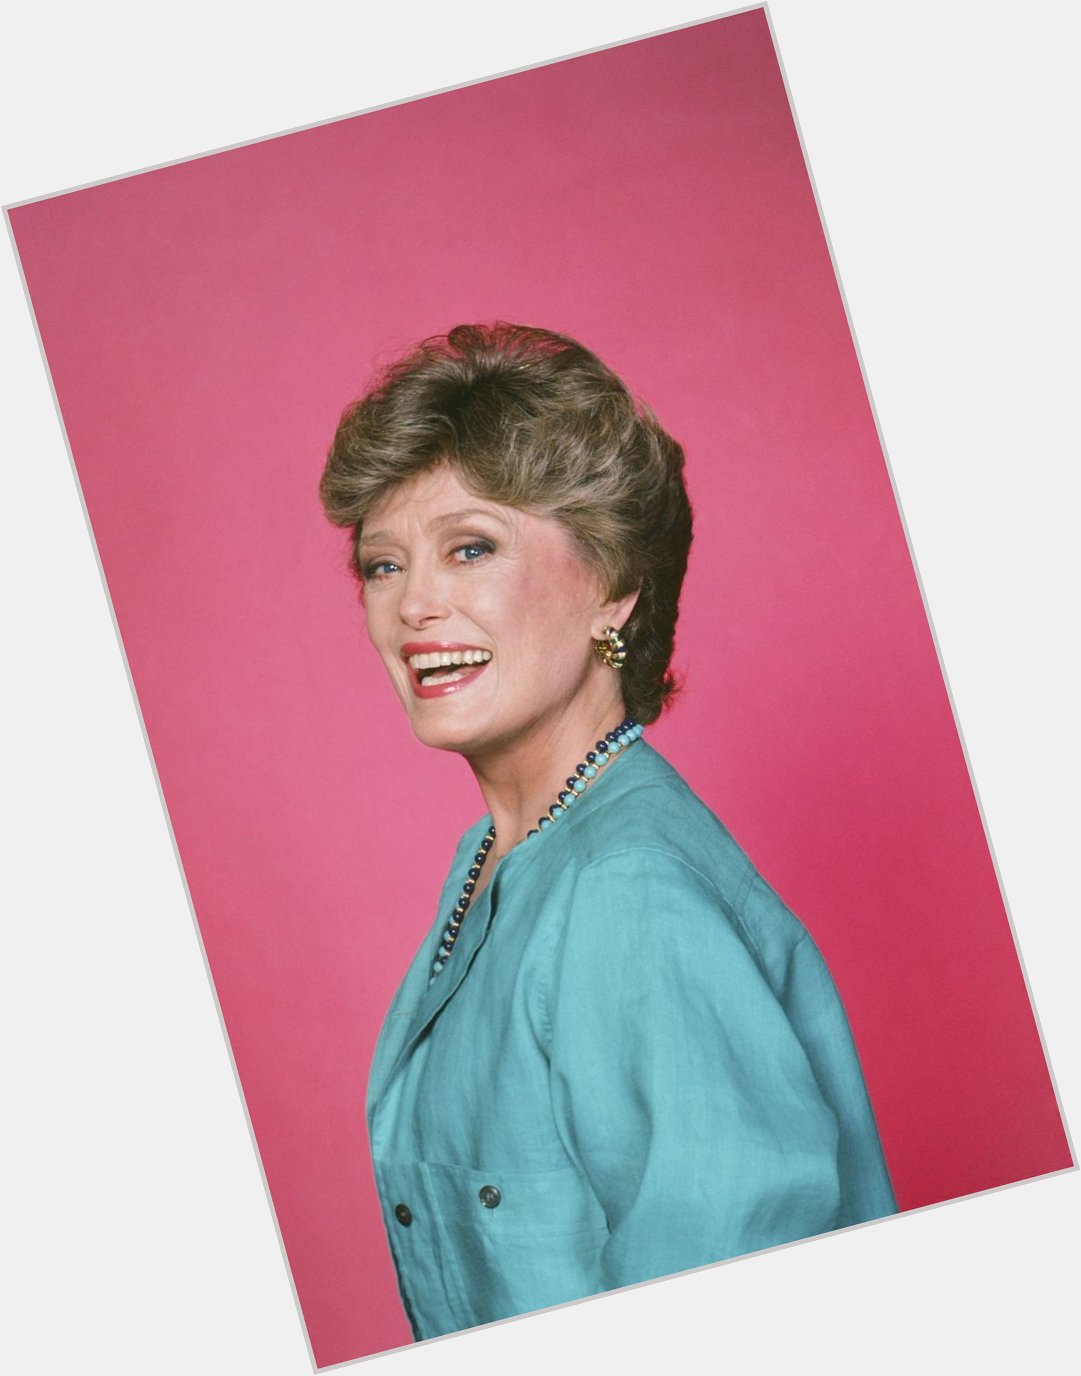 Happy heavenly birthday to Rue McClanahan who played Blanche \"Eat dirt and die trash!\" 